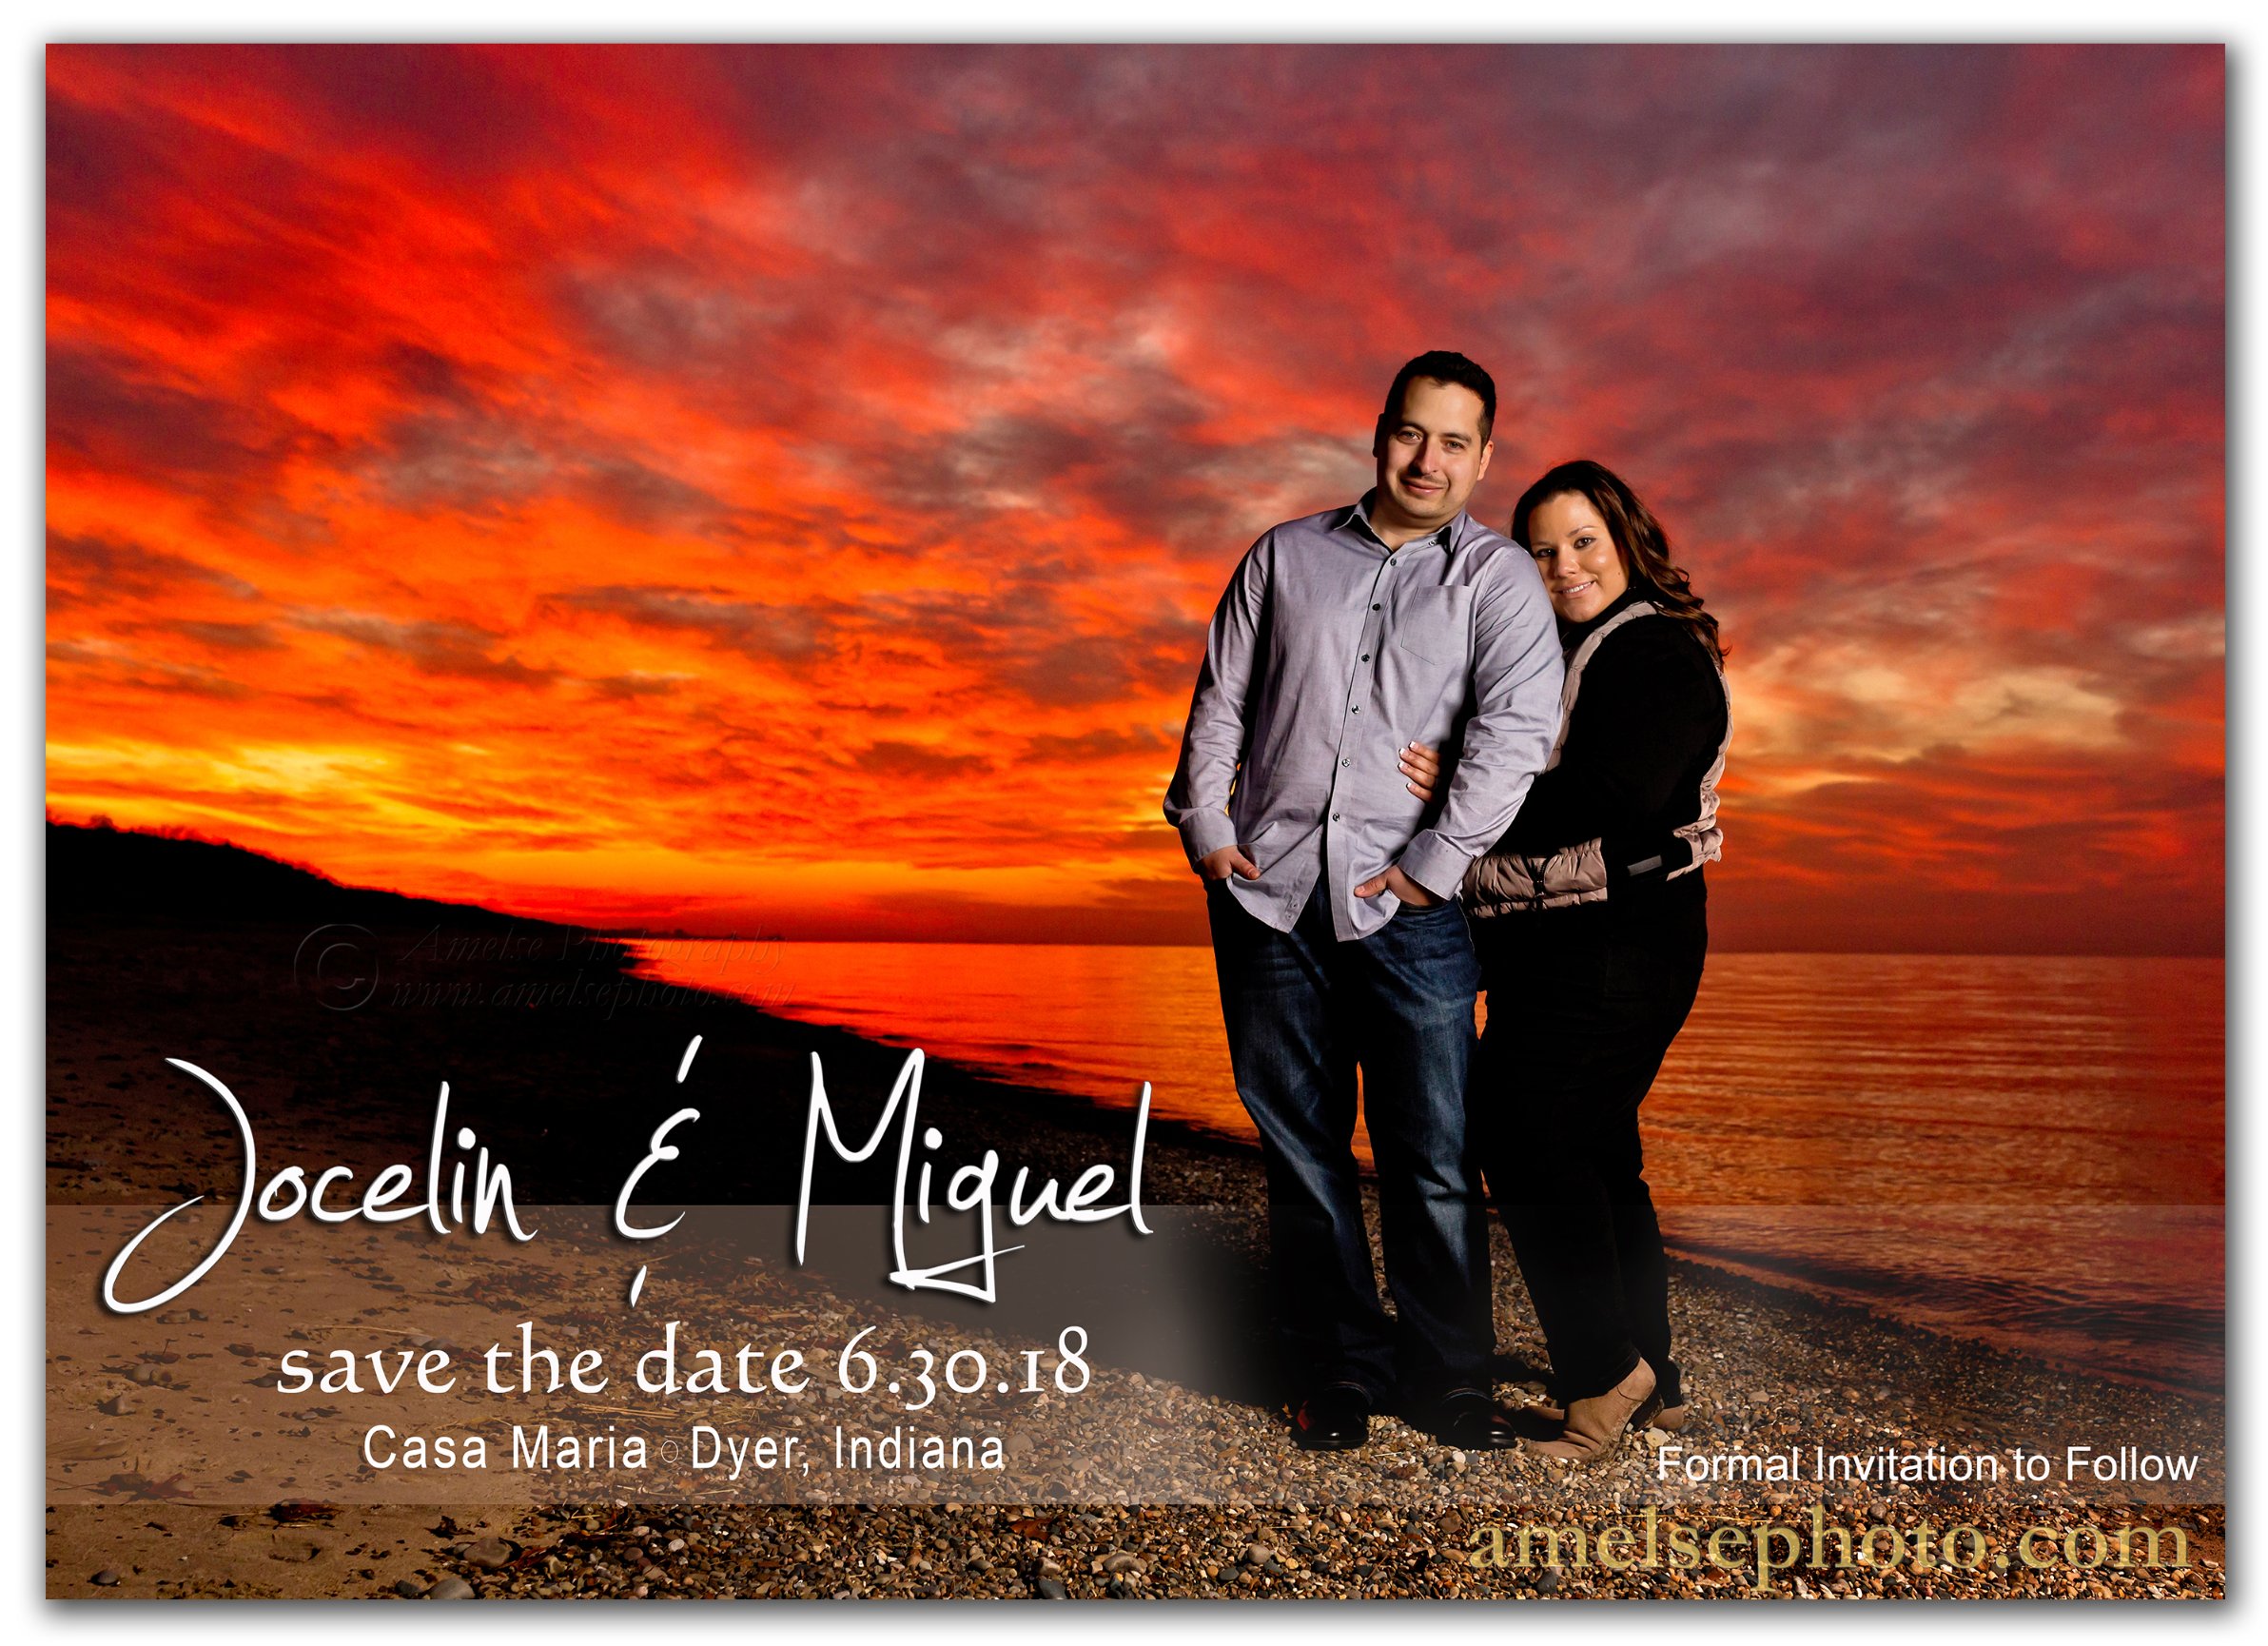 save-the-date-cards-amelse-photography-219-629-9662